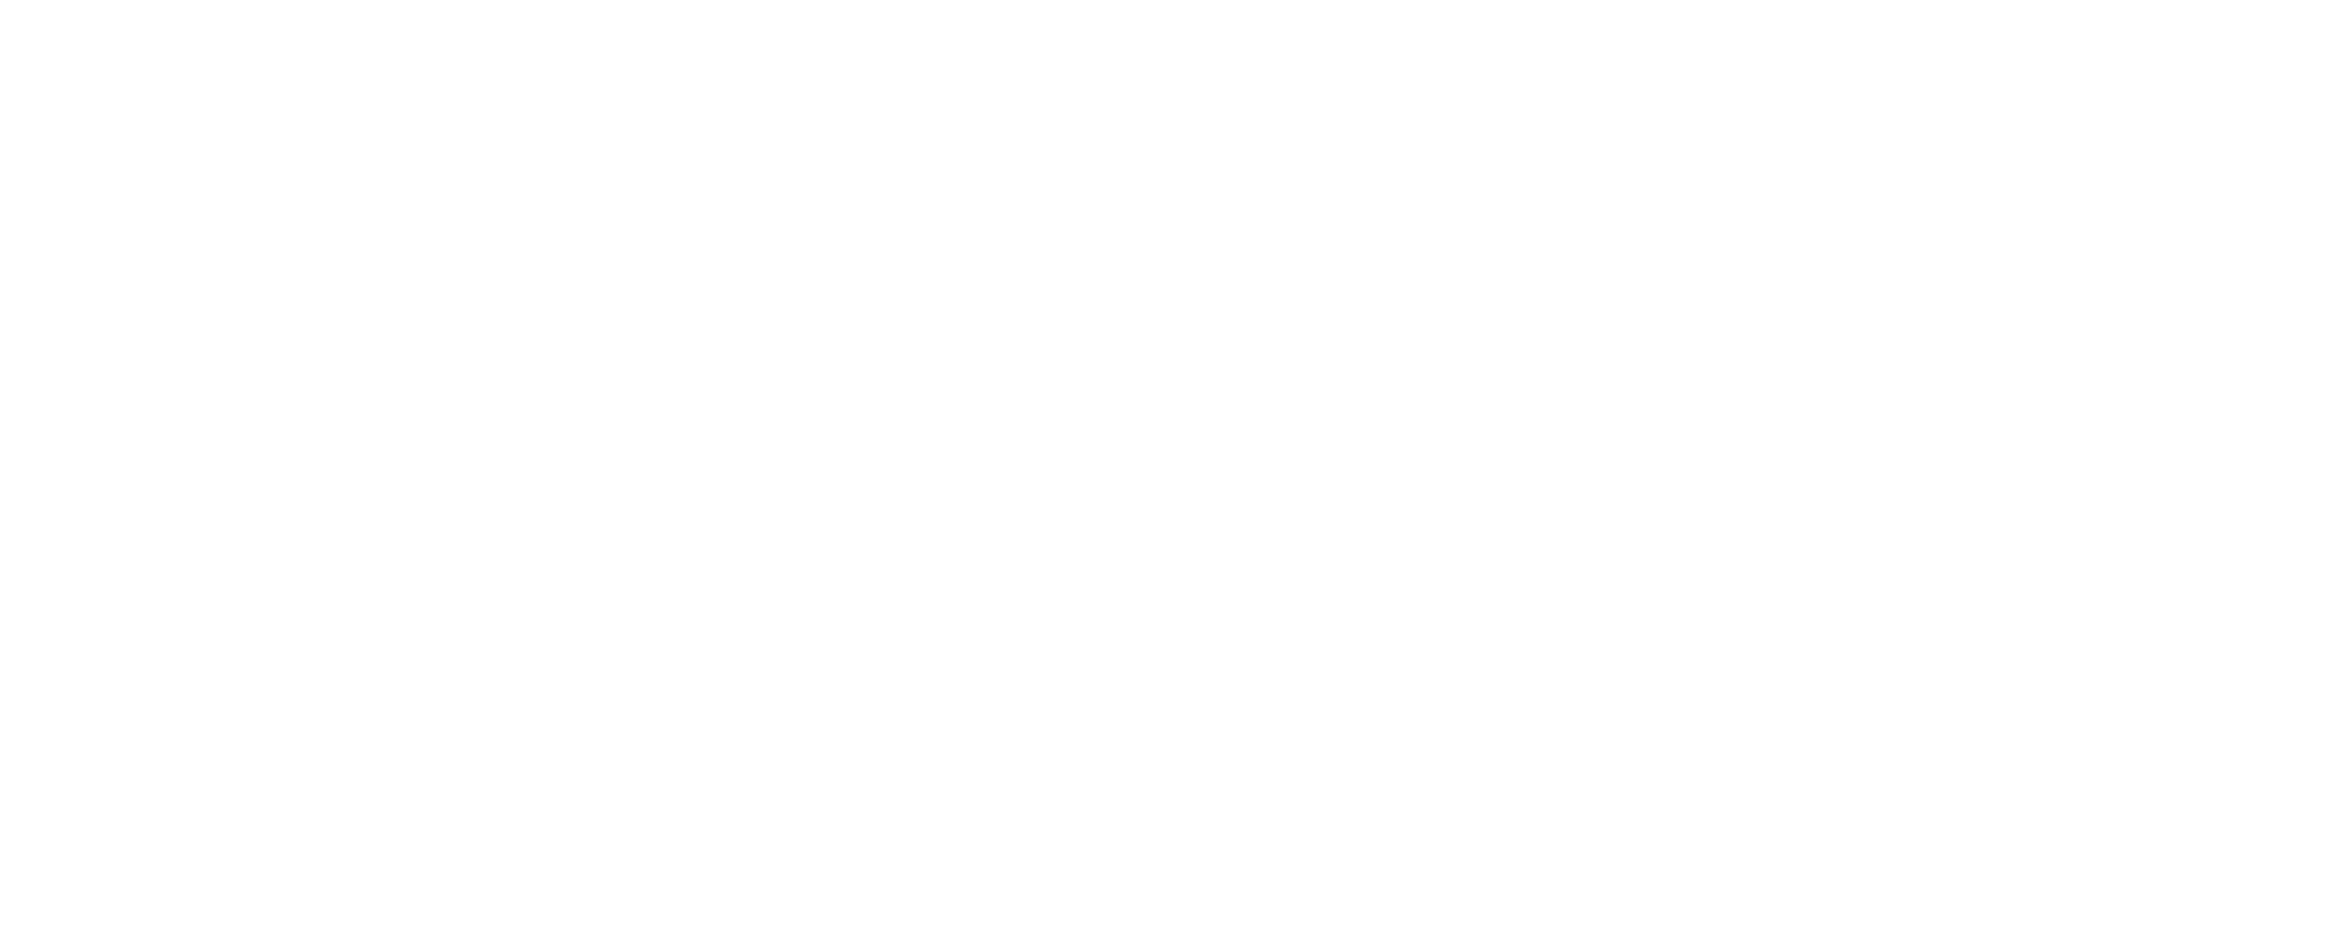 The Hedges apartment homes